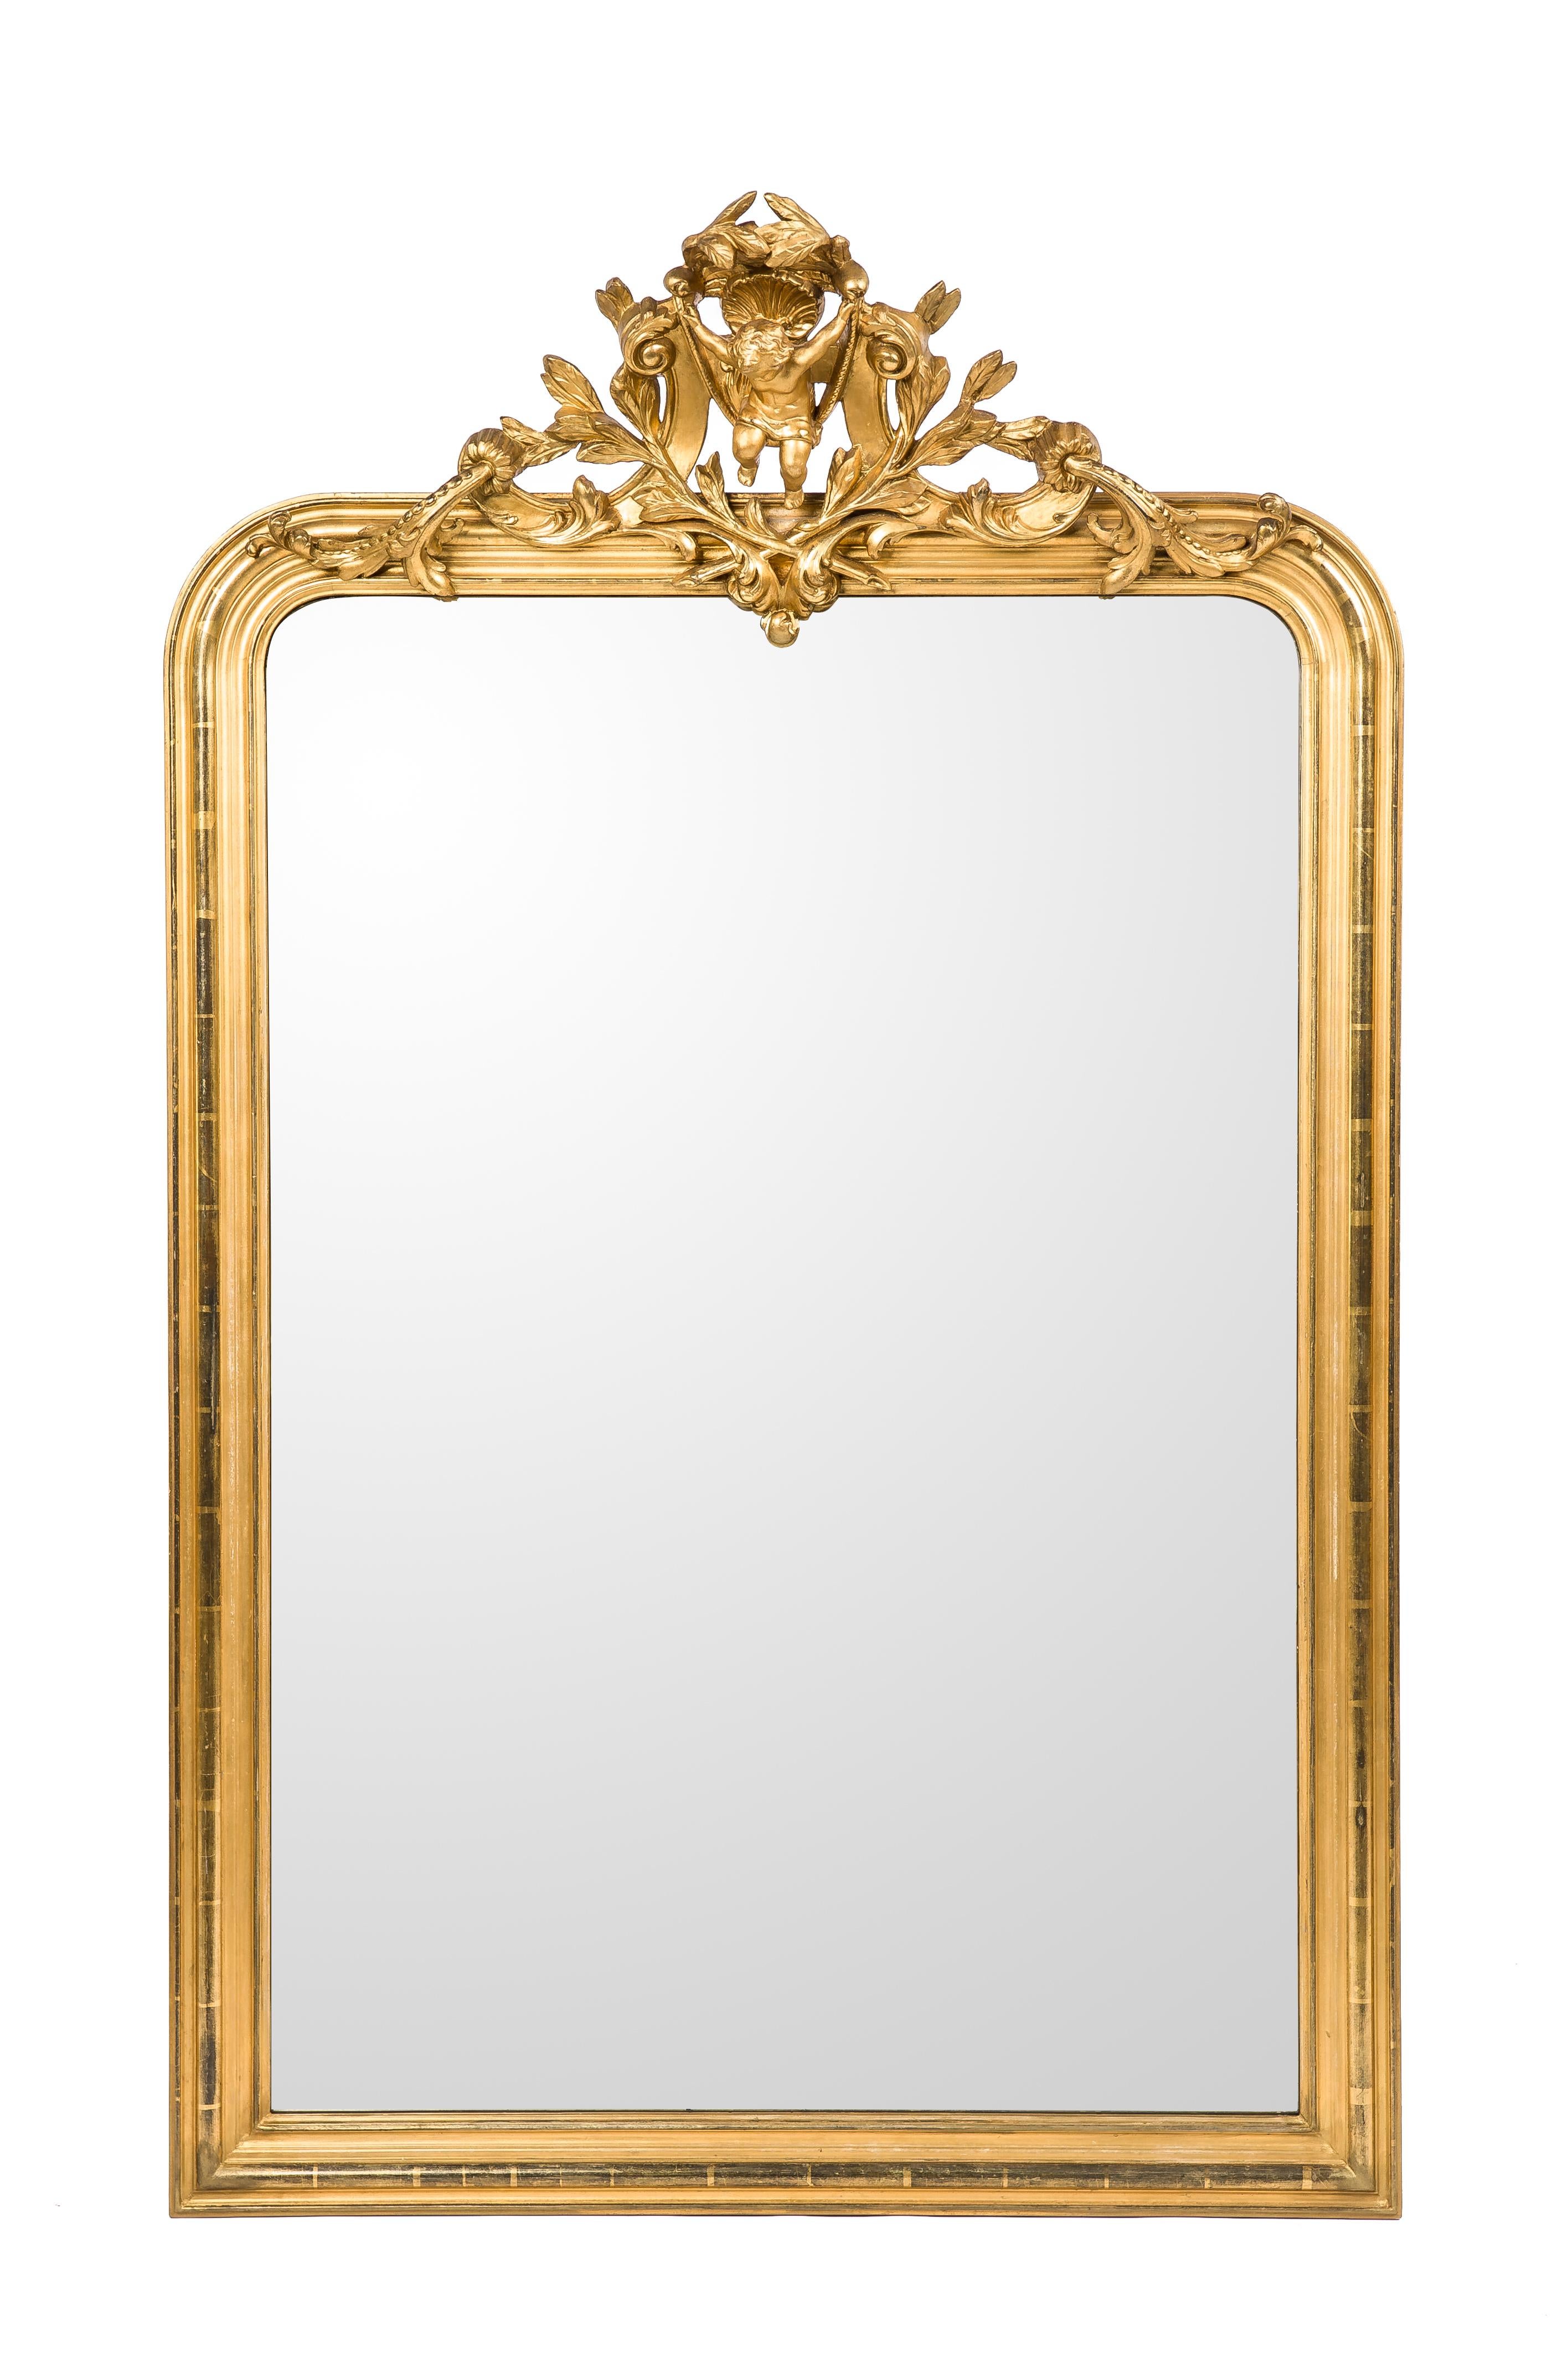 Antique French Gold Leaf Gilt Louis Philippe Mirror with Putti Dated 1879 For Sale 4